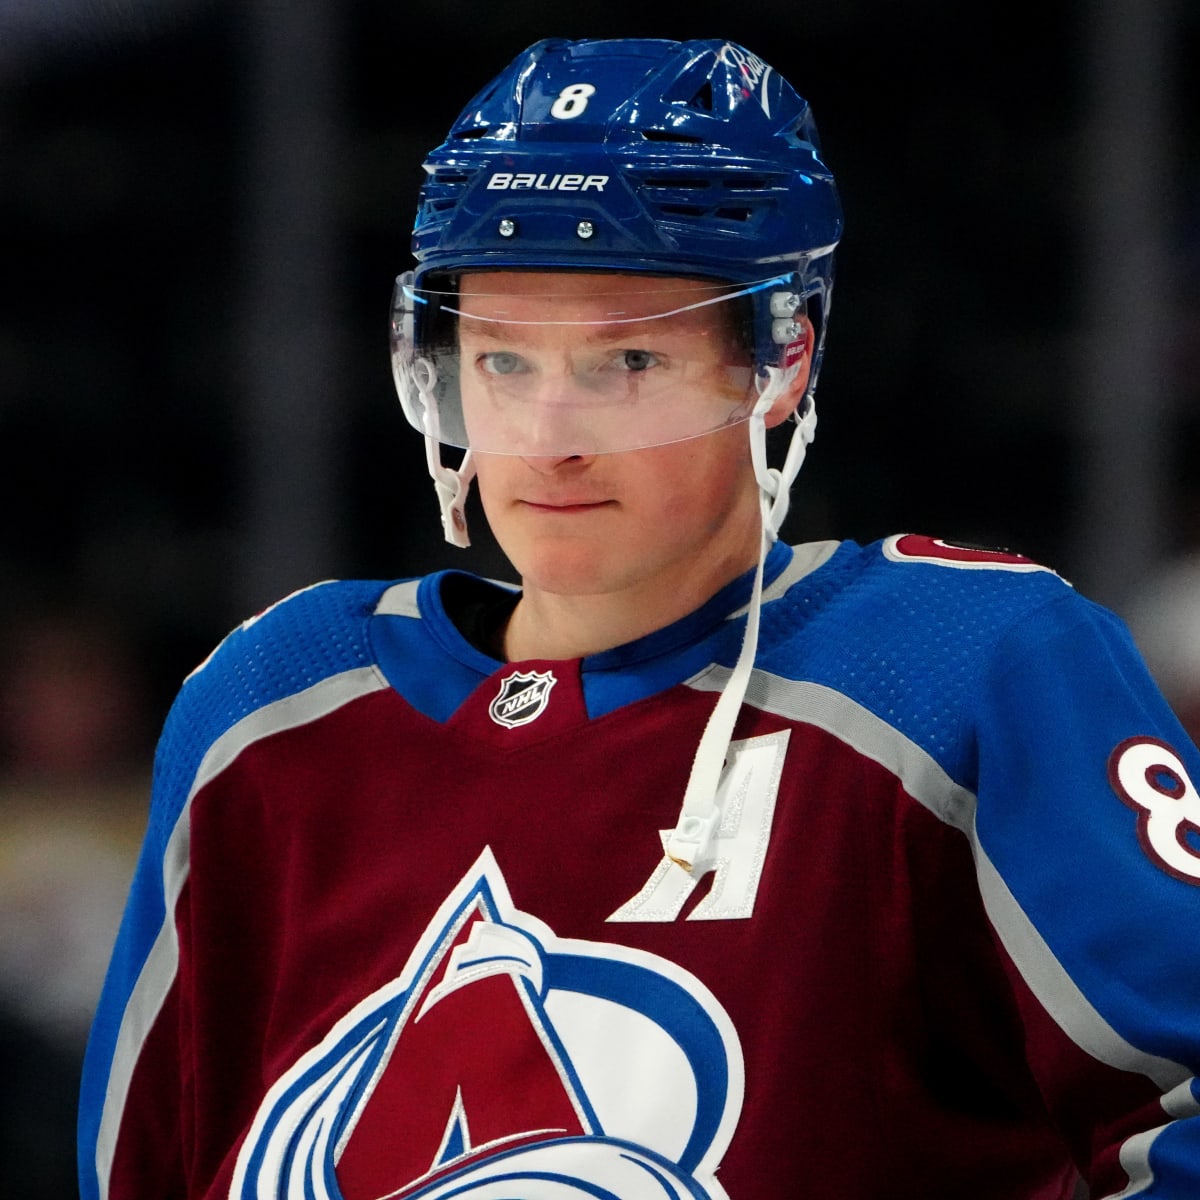 Why the Devon Toews trade was such a steal for Joe Sakic